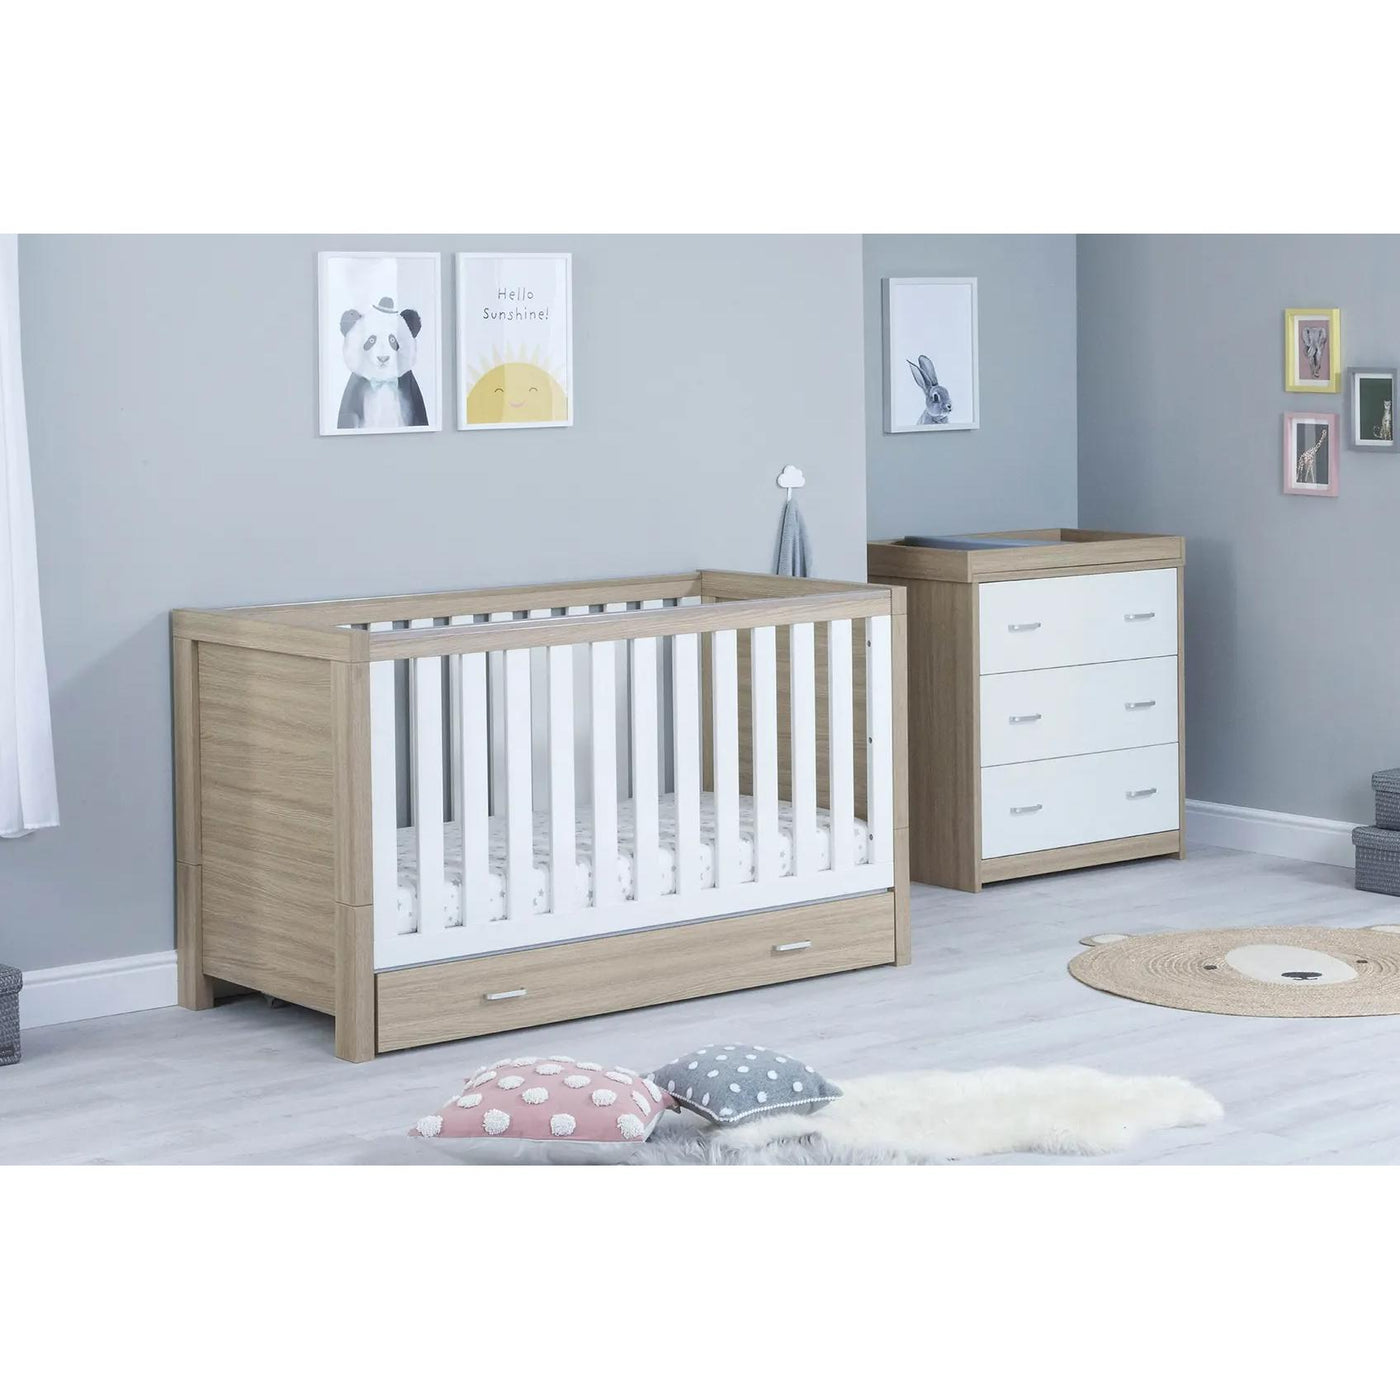 Luno 2 Piece Room Set with Drawer - Oak White